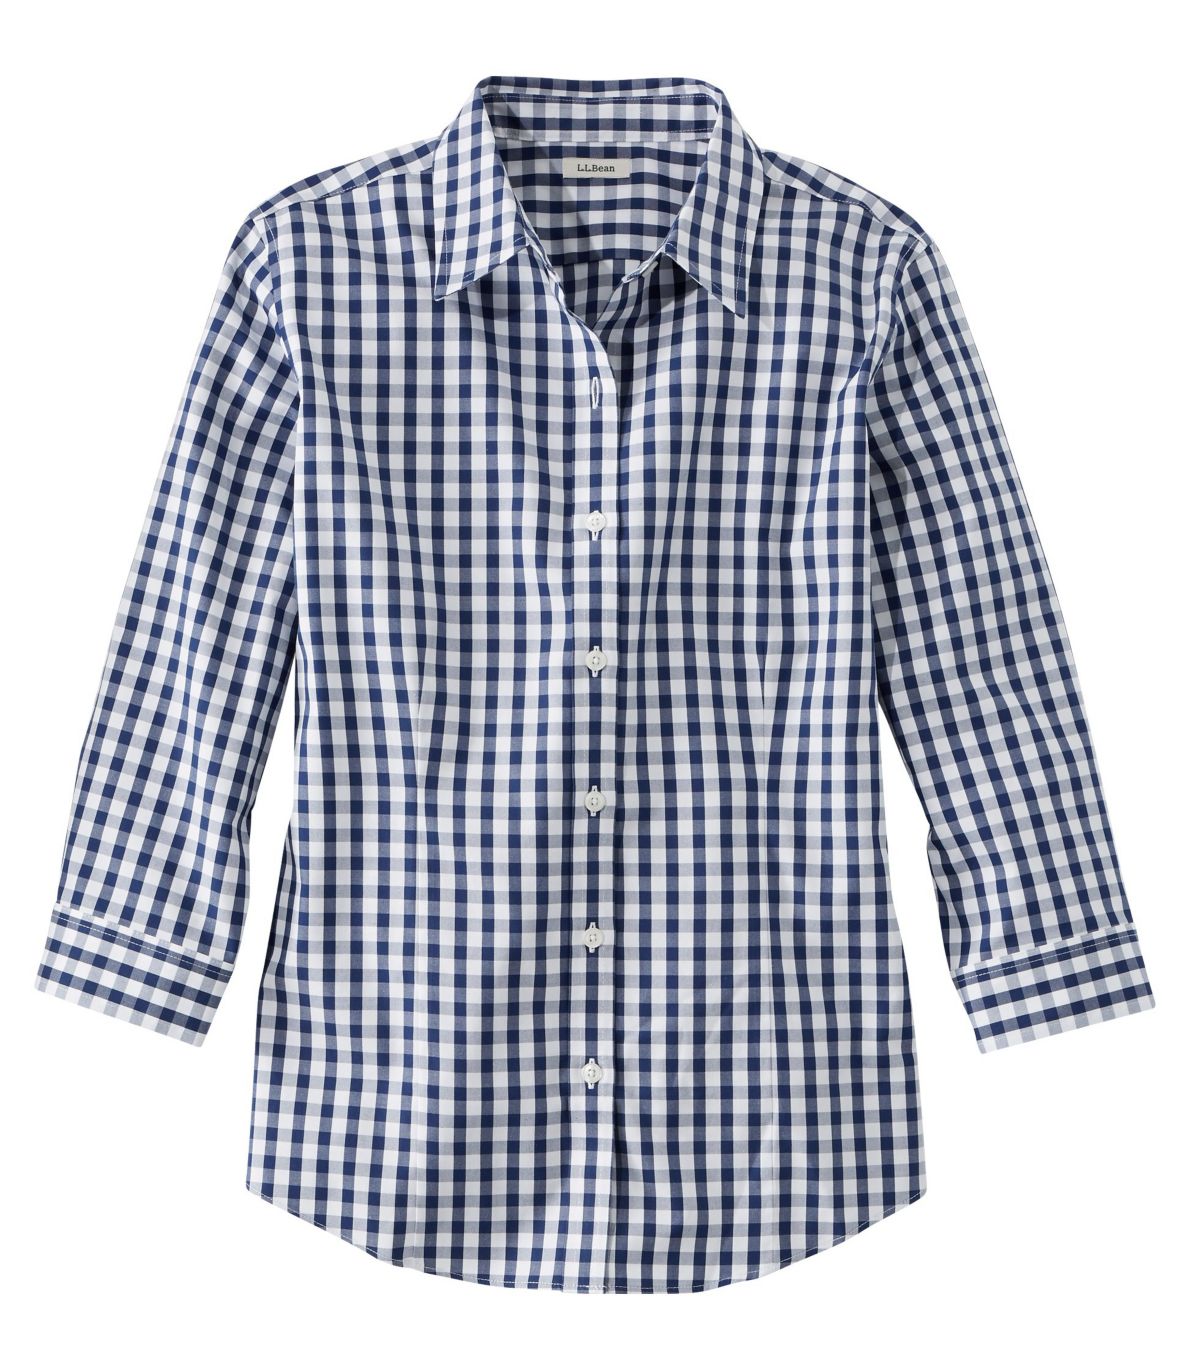 Women's Wrinkle-Free Pinpoint Oxford Shirt, Three-Quarter-Sleeve Slightly Fitted Plaid